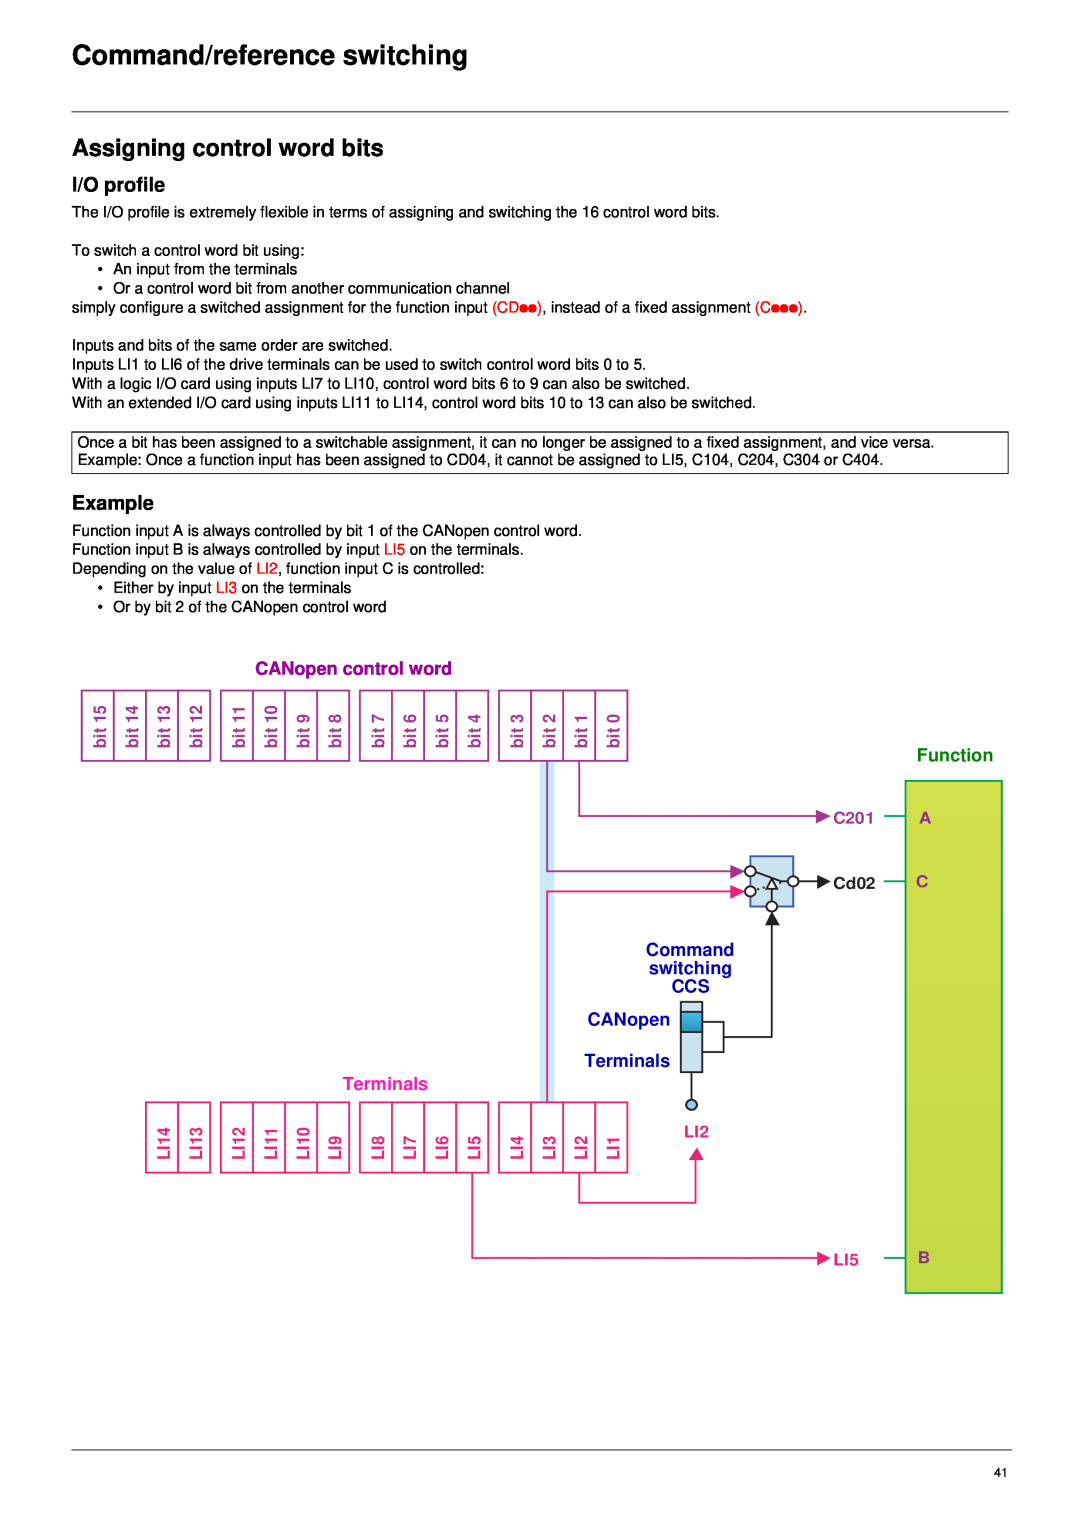 Schneider Electric 61 Assigning control word bits, Example, Command/reference switching, I/O profile, CANopen control word 